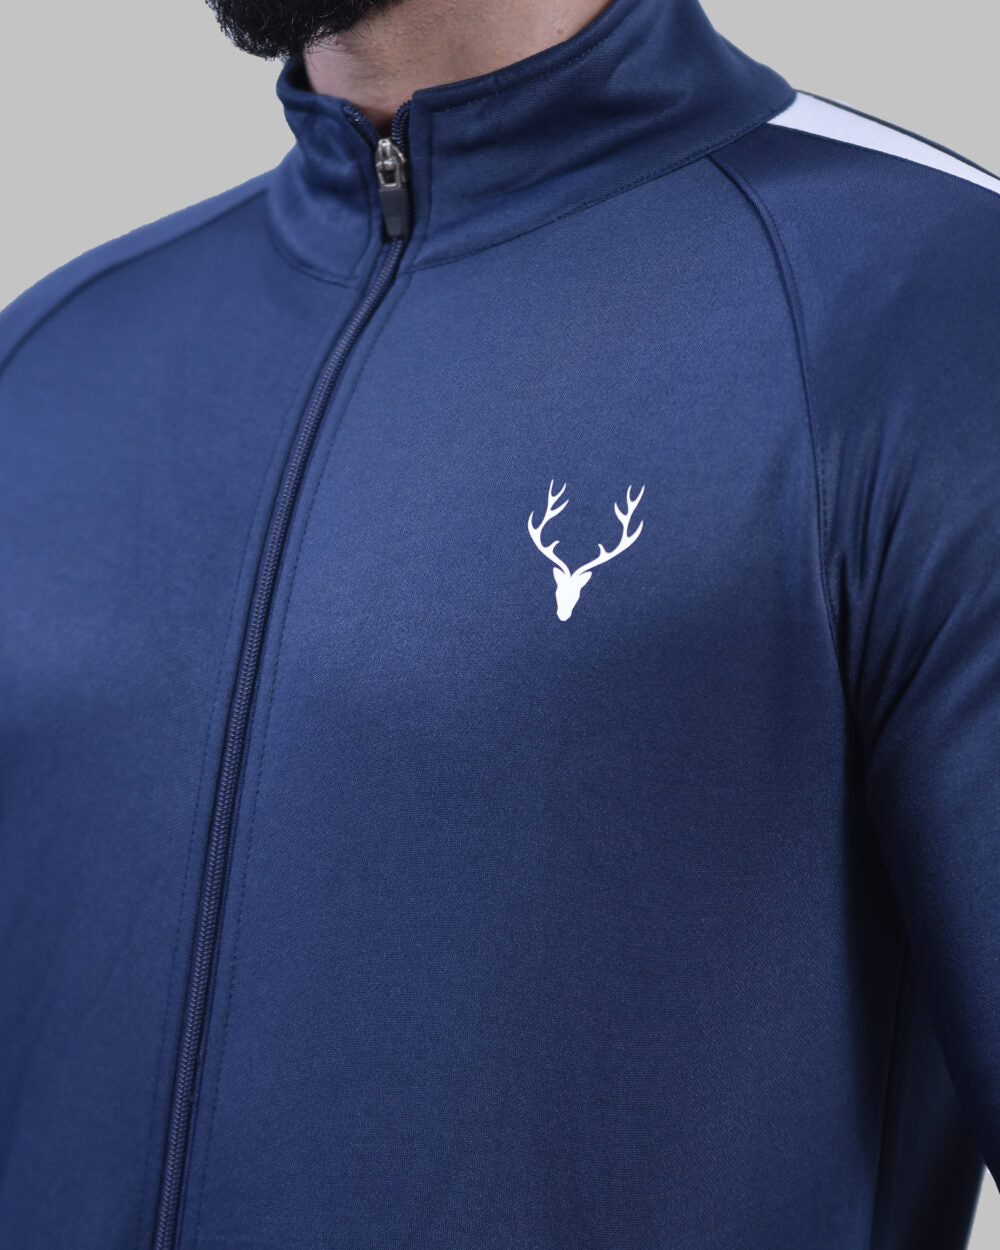 Stag Elite Tracksuit 1.0 (Navy Blue & White) - Stag Clothing